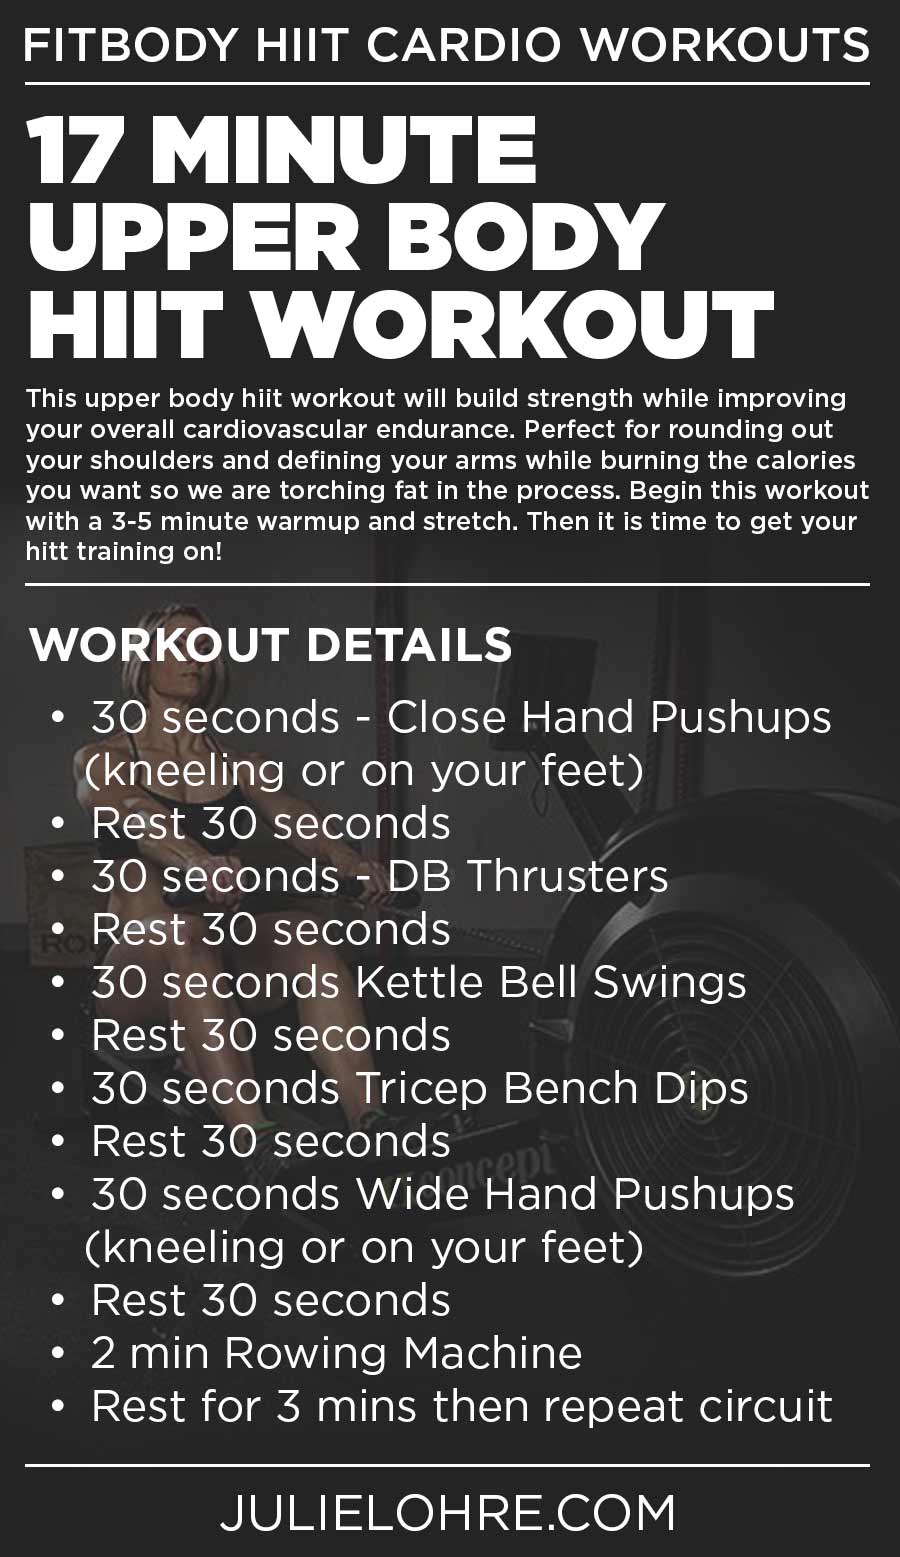 HIIT Workout For Upper Body